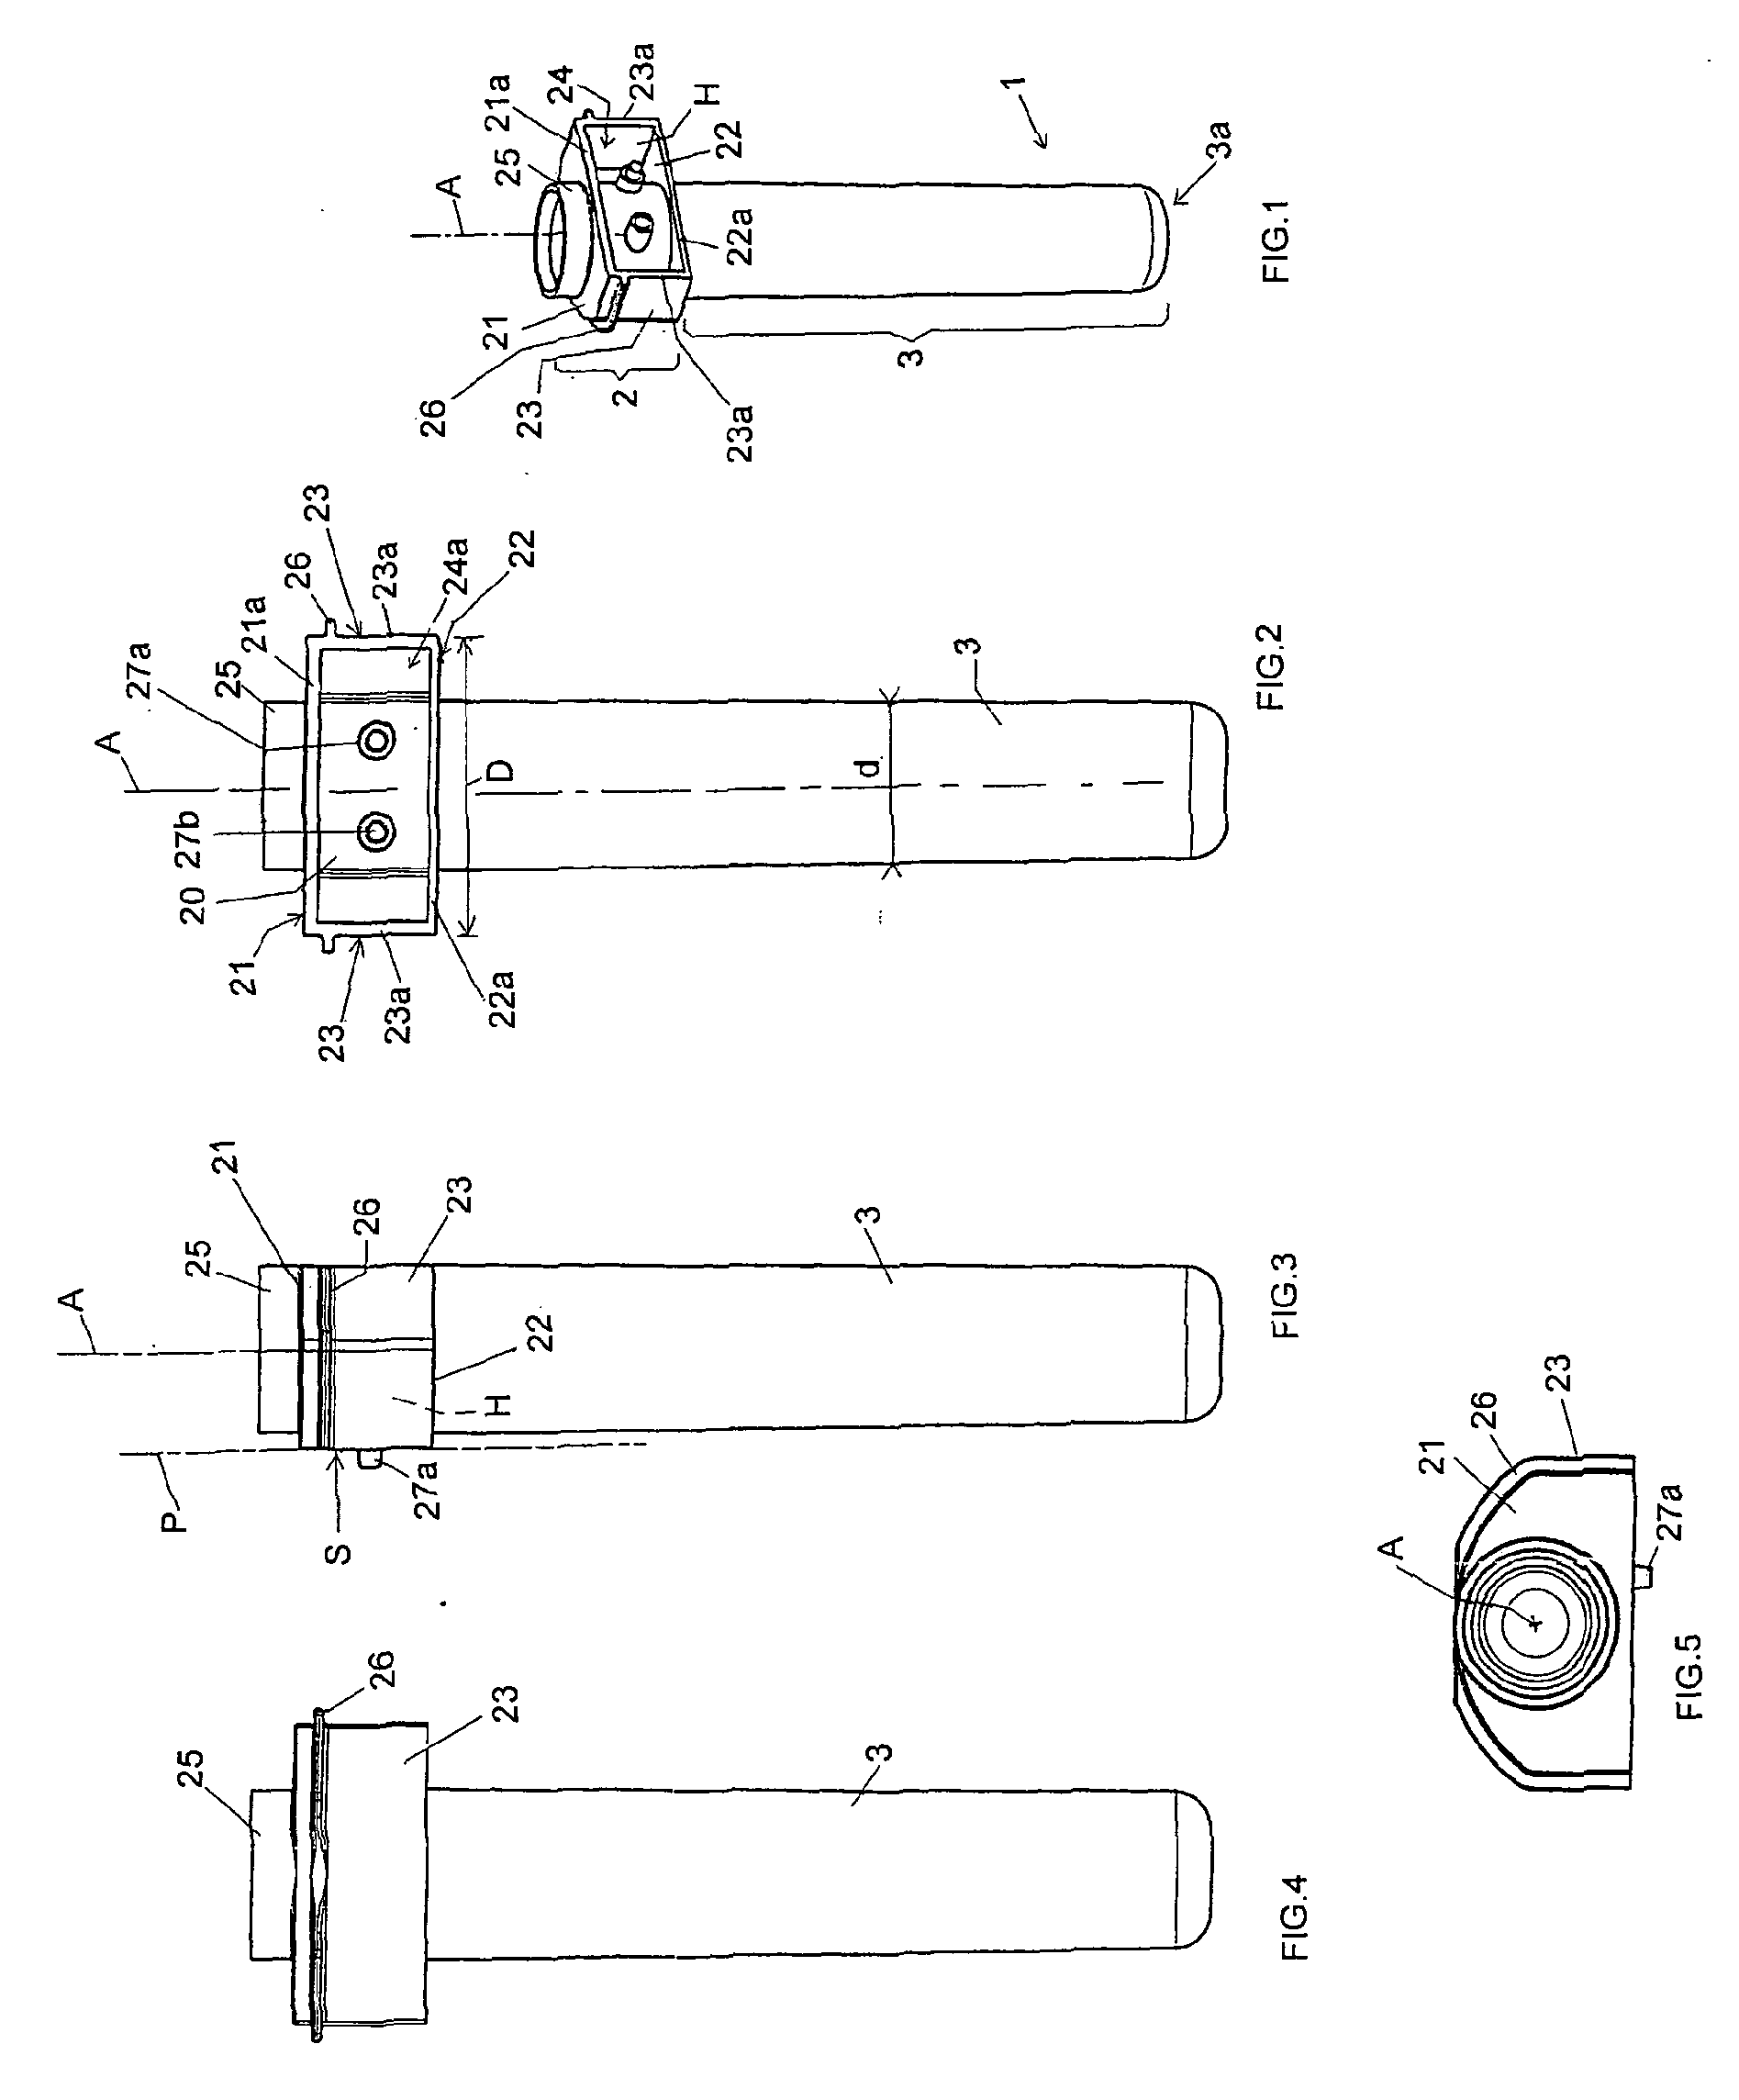 Plastic Preform and Single Container for Making a Dual-Container Dispenser